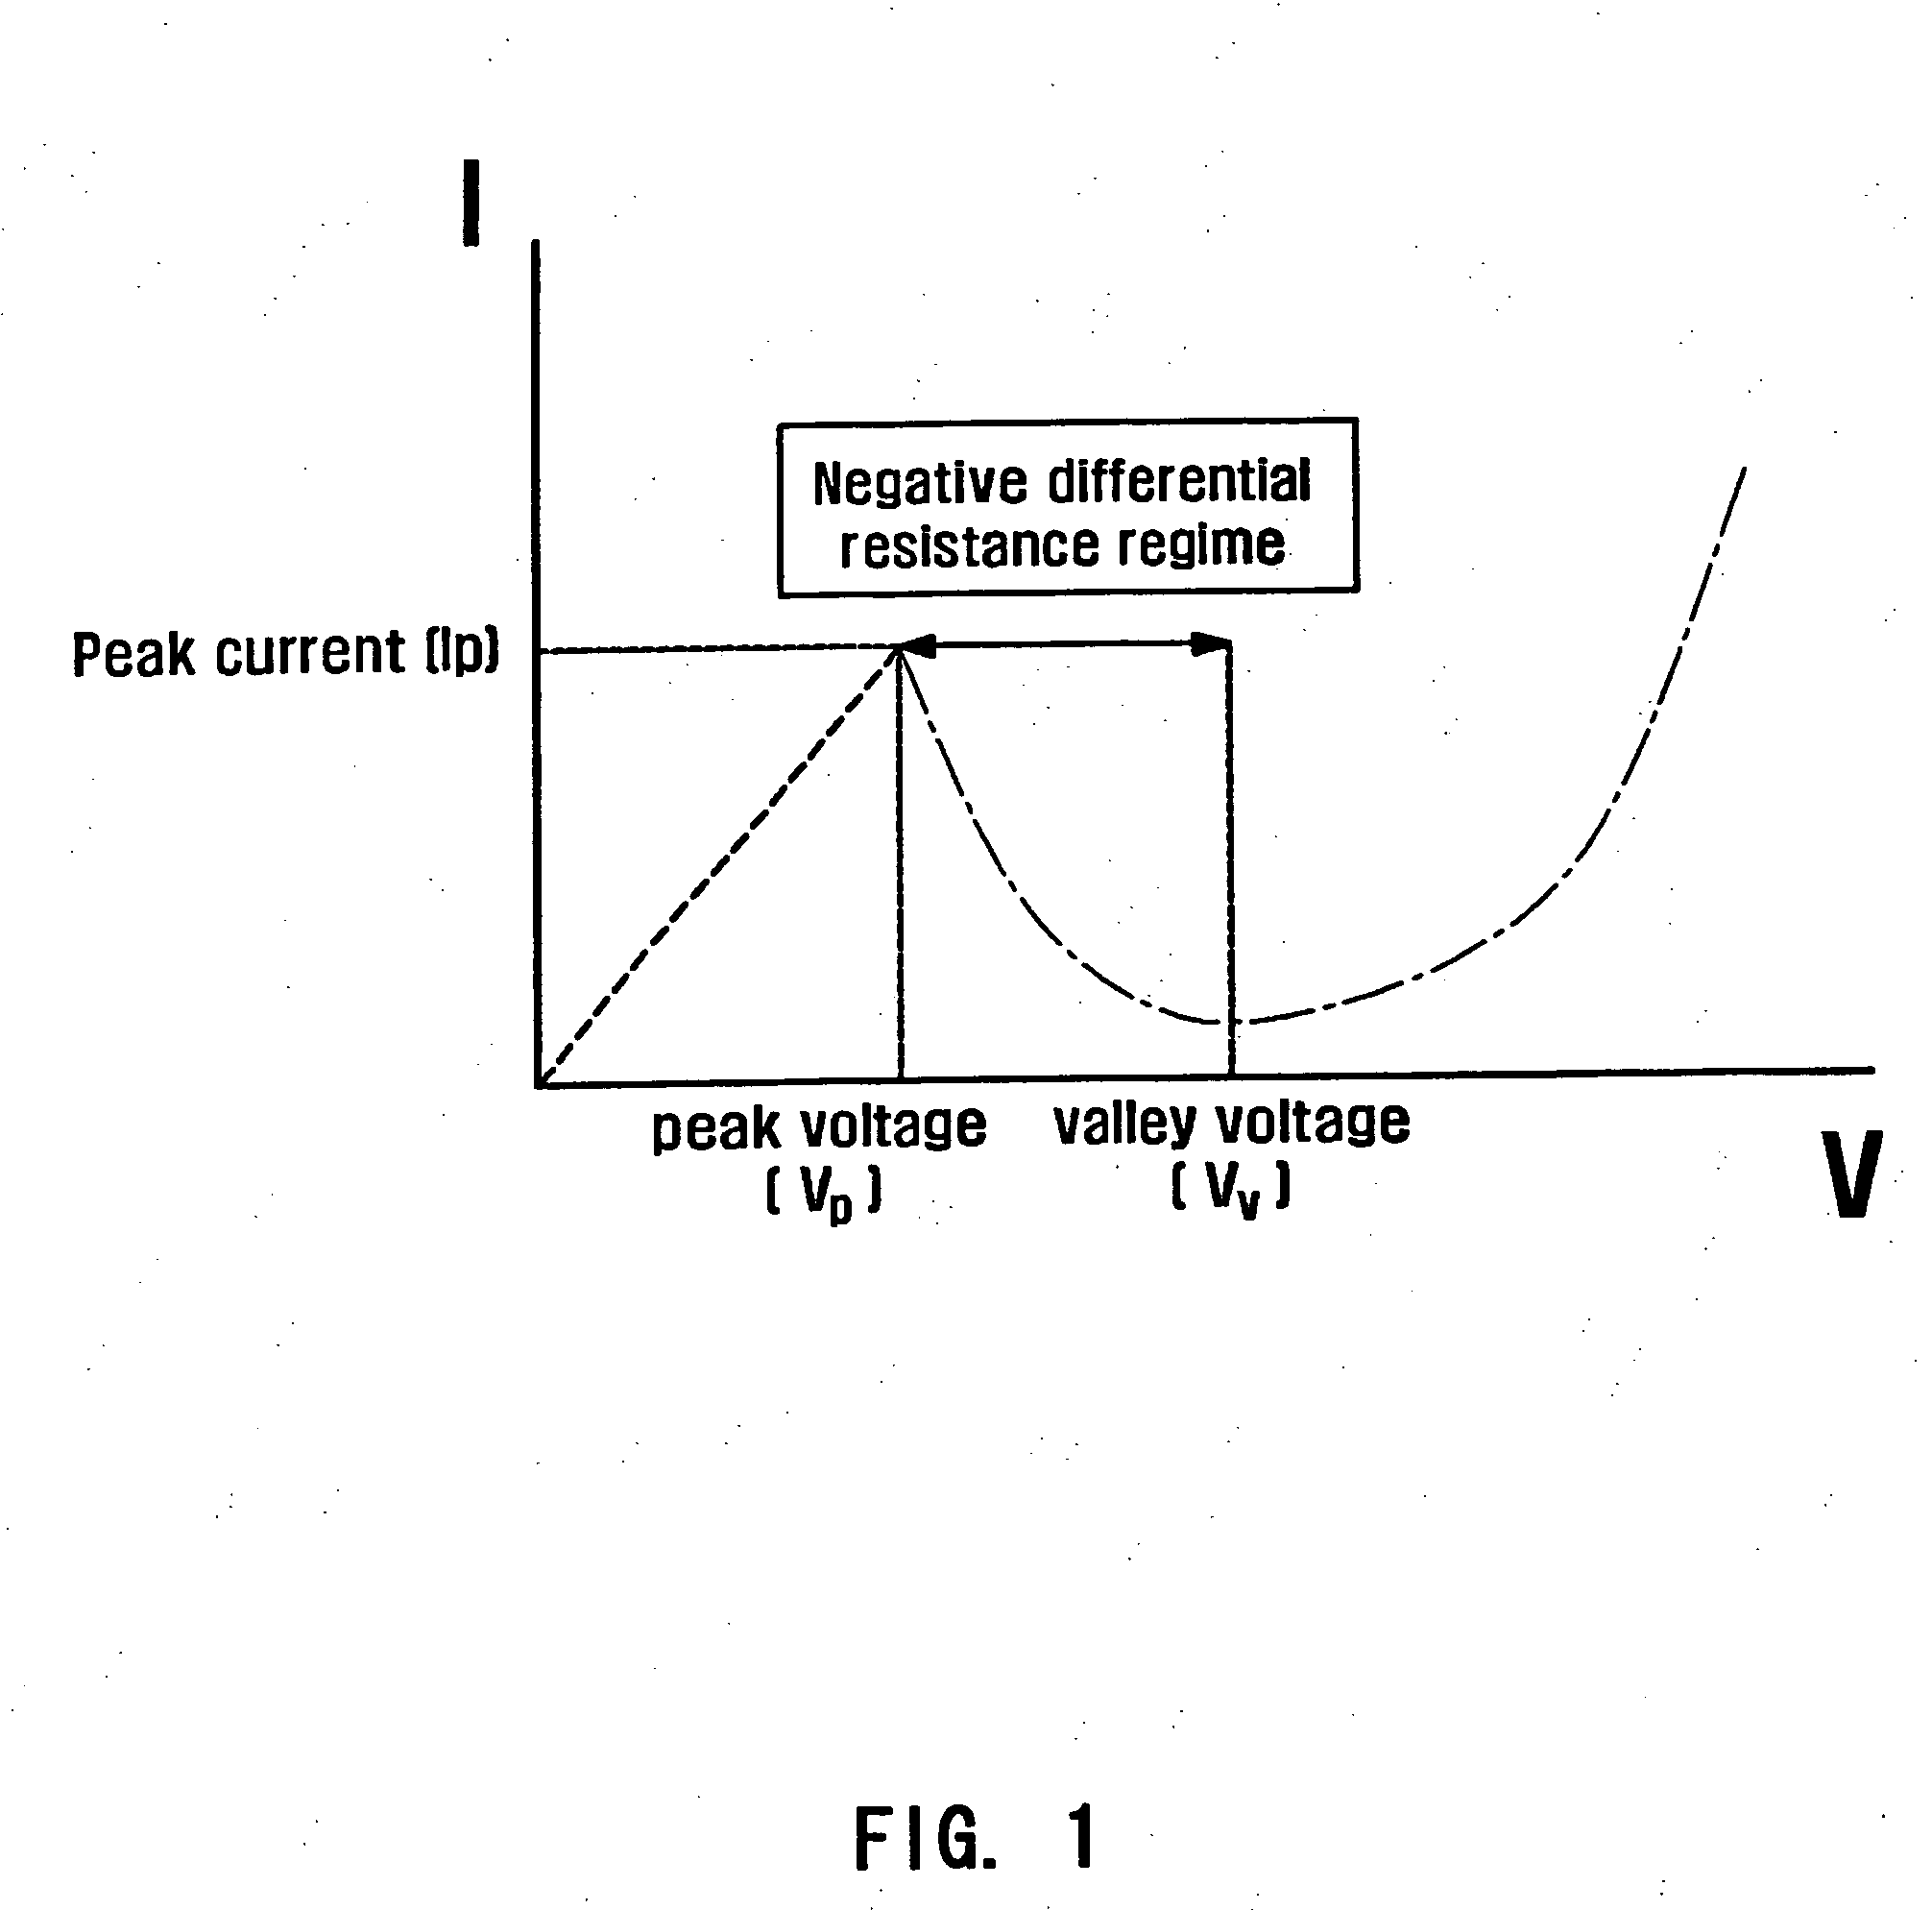 Tunneling diode logic IC using CML-type input driving circuit configuration and monostable bistable transition logic element (MOBILE)